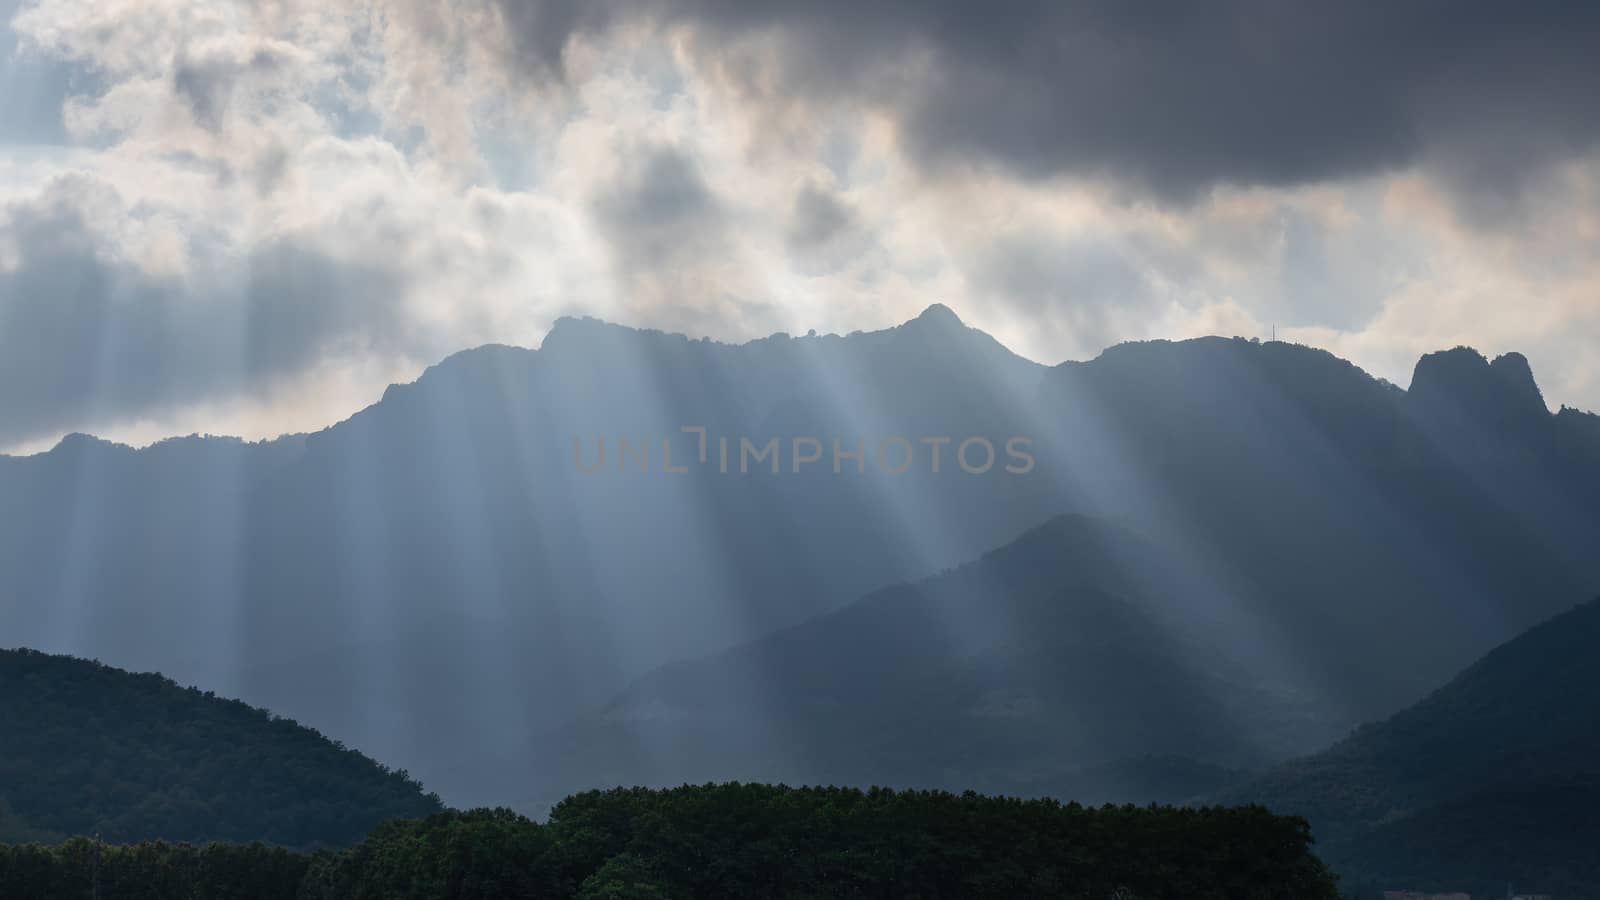 Bright sunlight shining through hole of clouds to dark scene of mountain range in Spain by Digoarpi